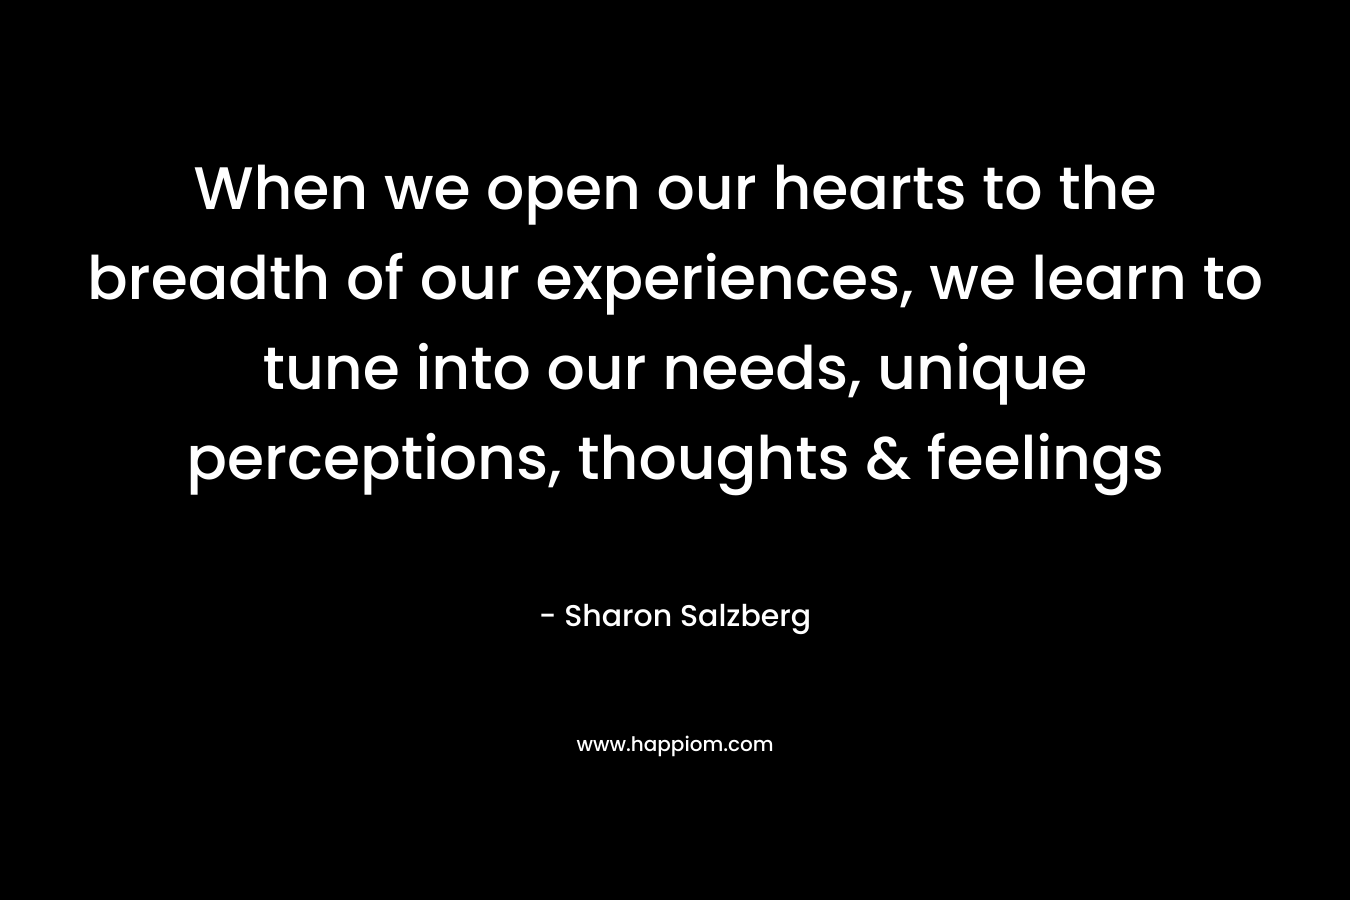 When we open our hearts to the breadth of our experiences, we learn to tune into our needs, unique perceptions, thoughts & feelings